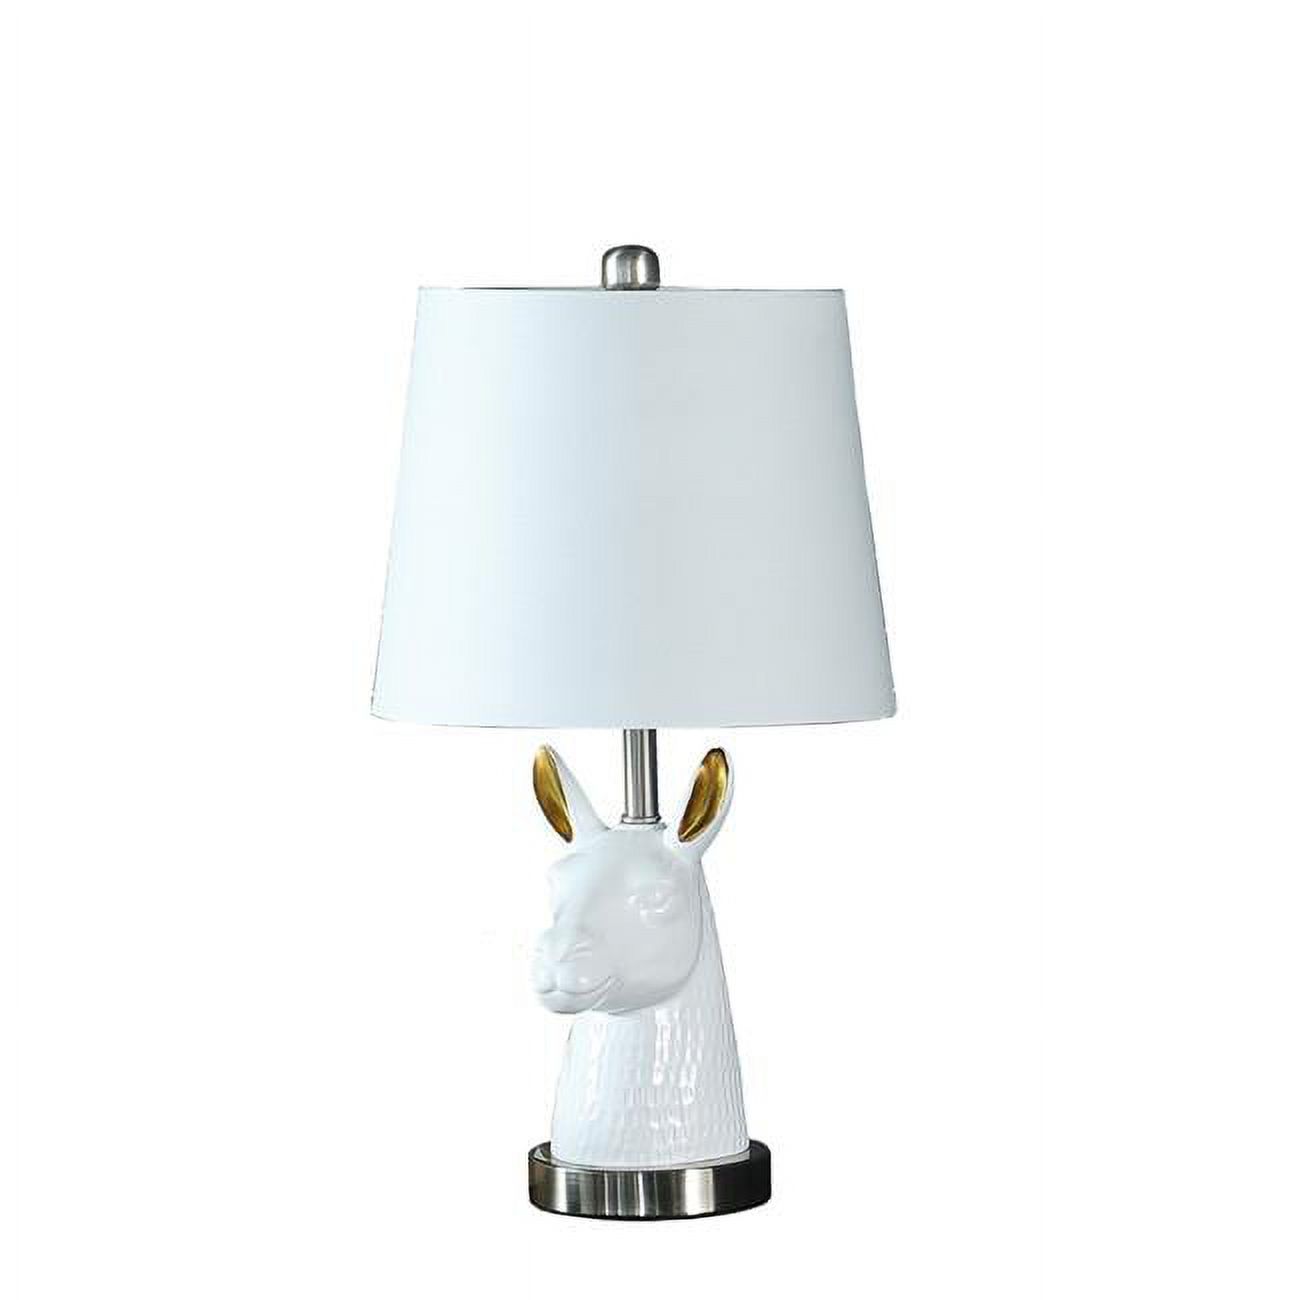 HomeRoots 468774 21 in. Llama Table Lamp, White & Gold - image 1 of 4